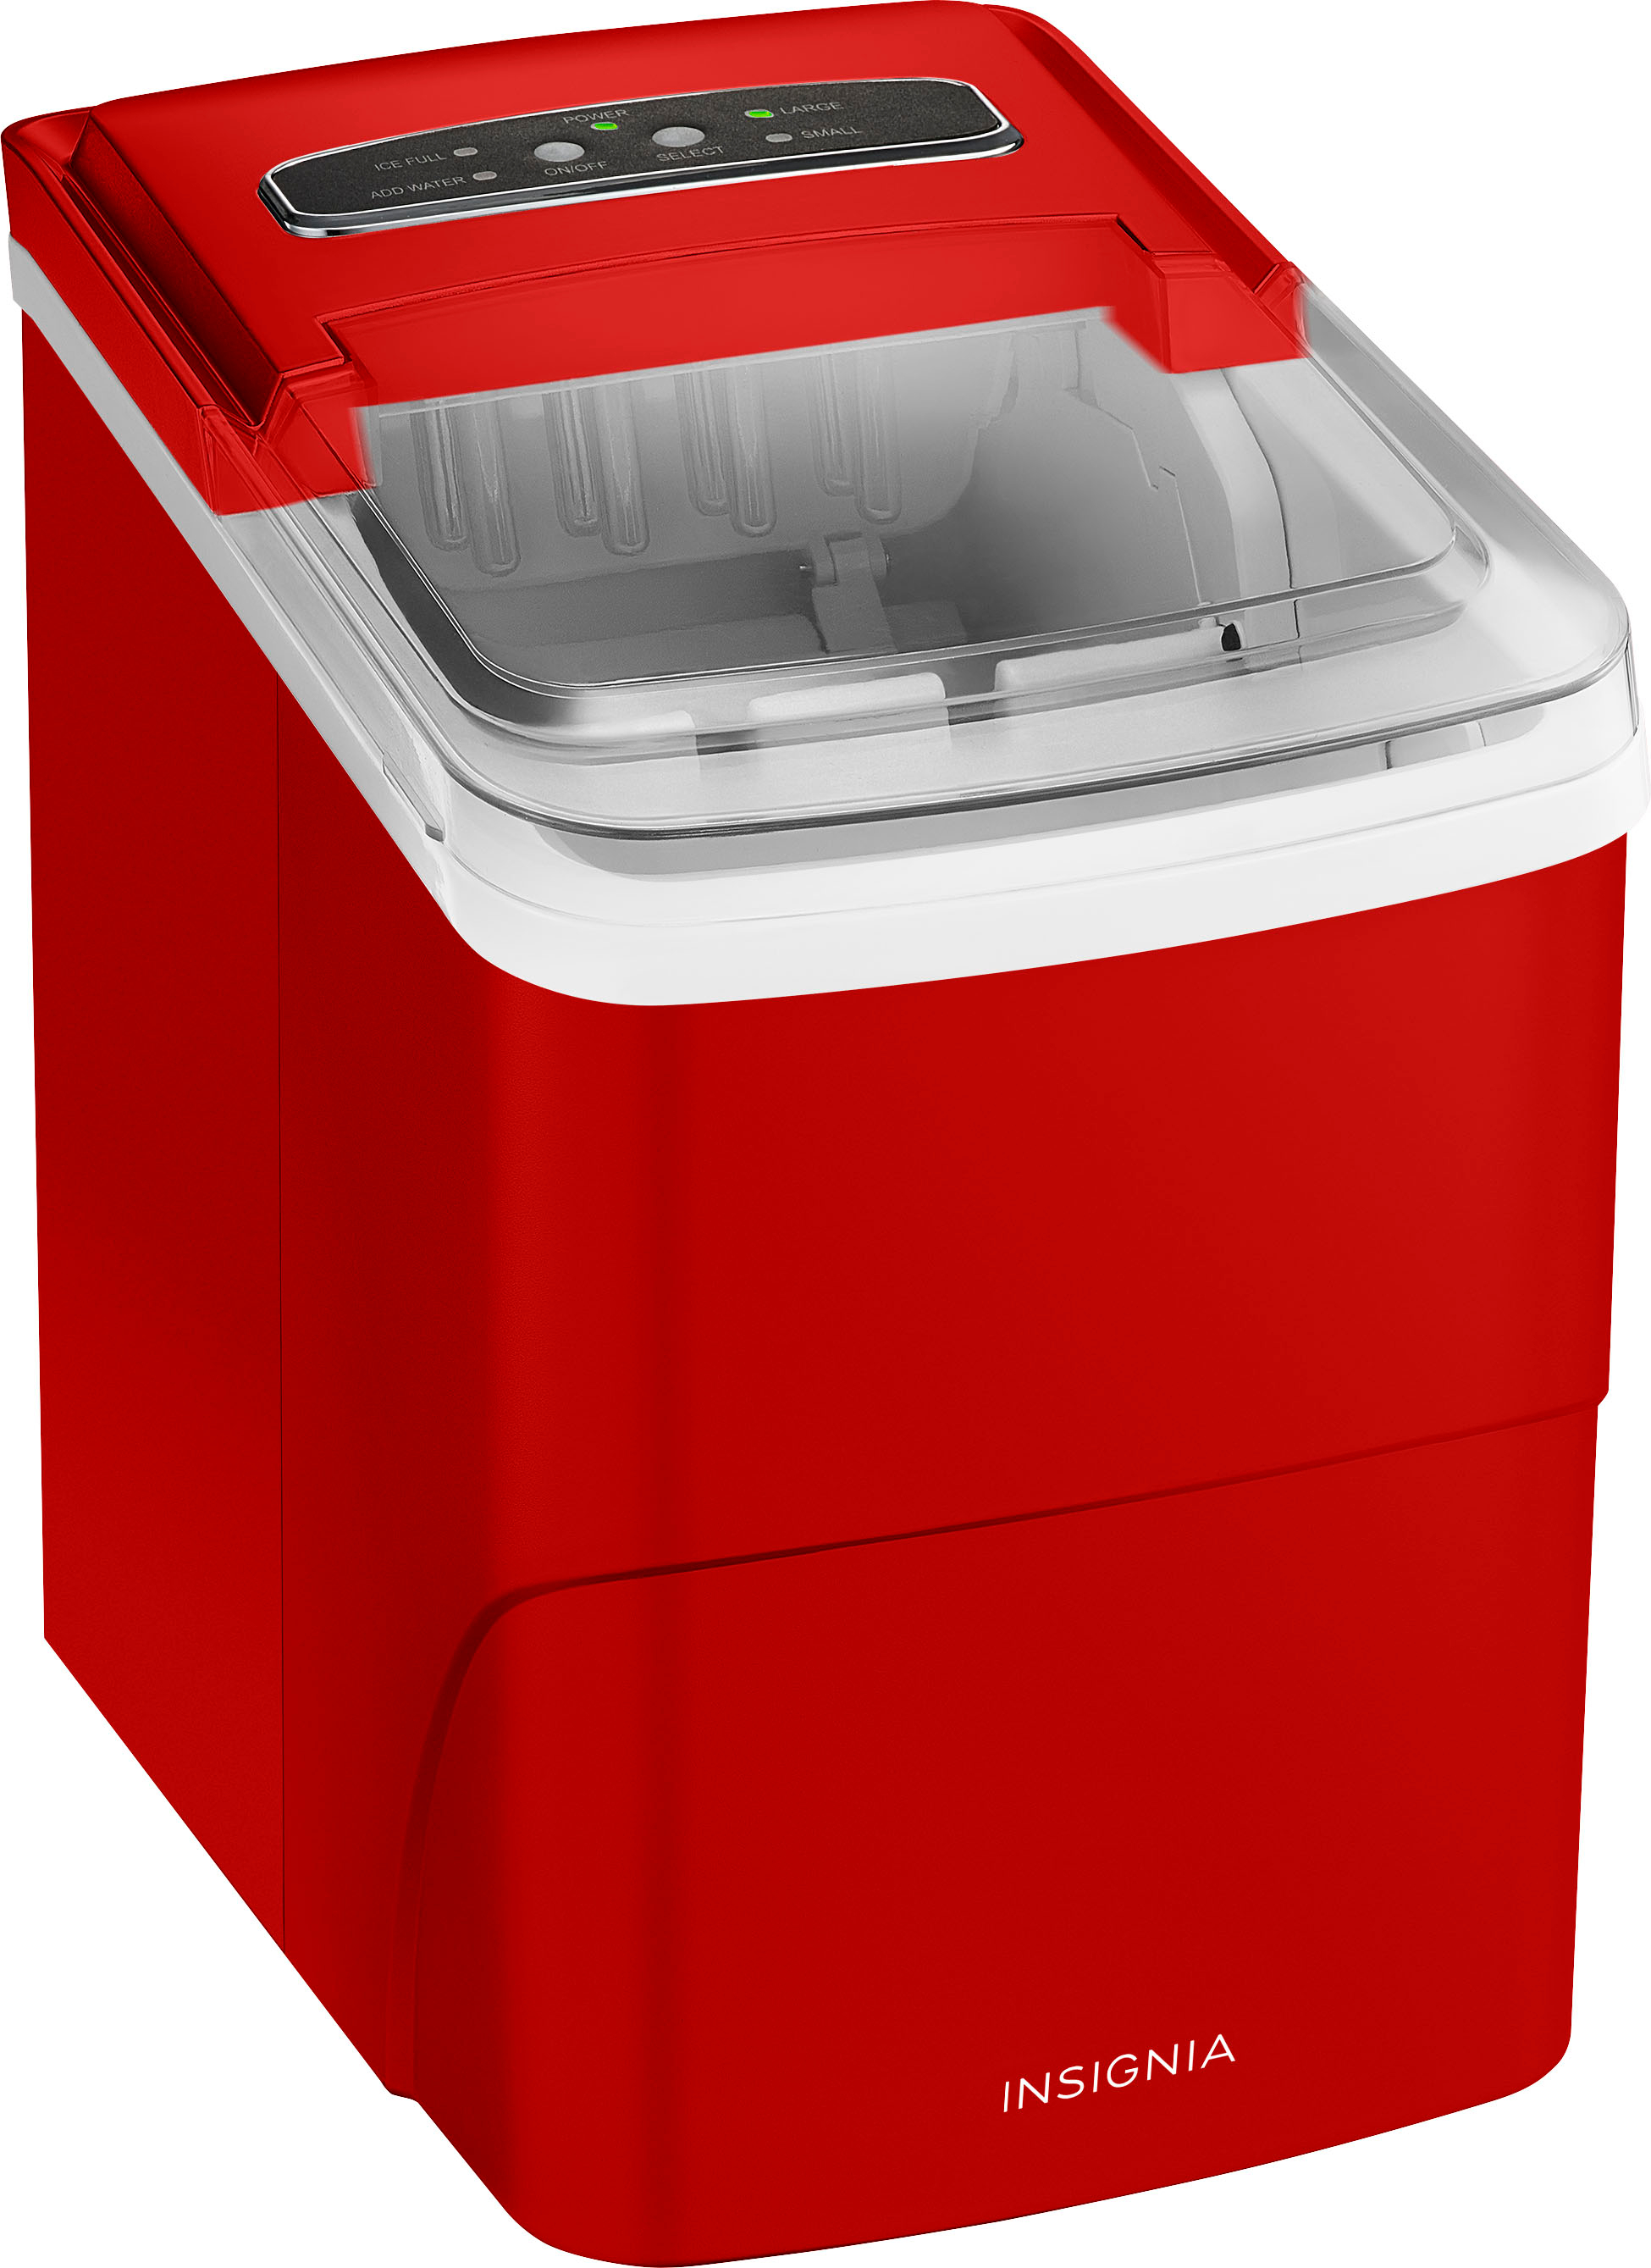 Insignia - 26 lb. Portable Icemaker with Auto Shut-Off - Red